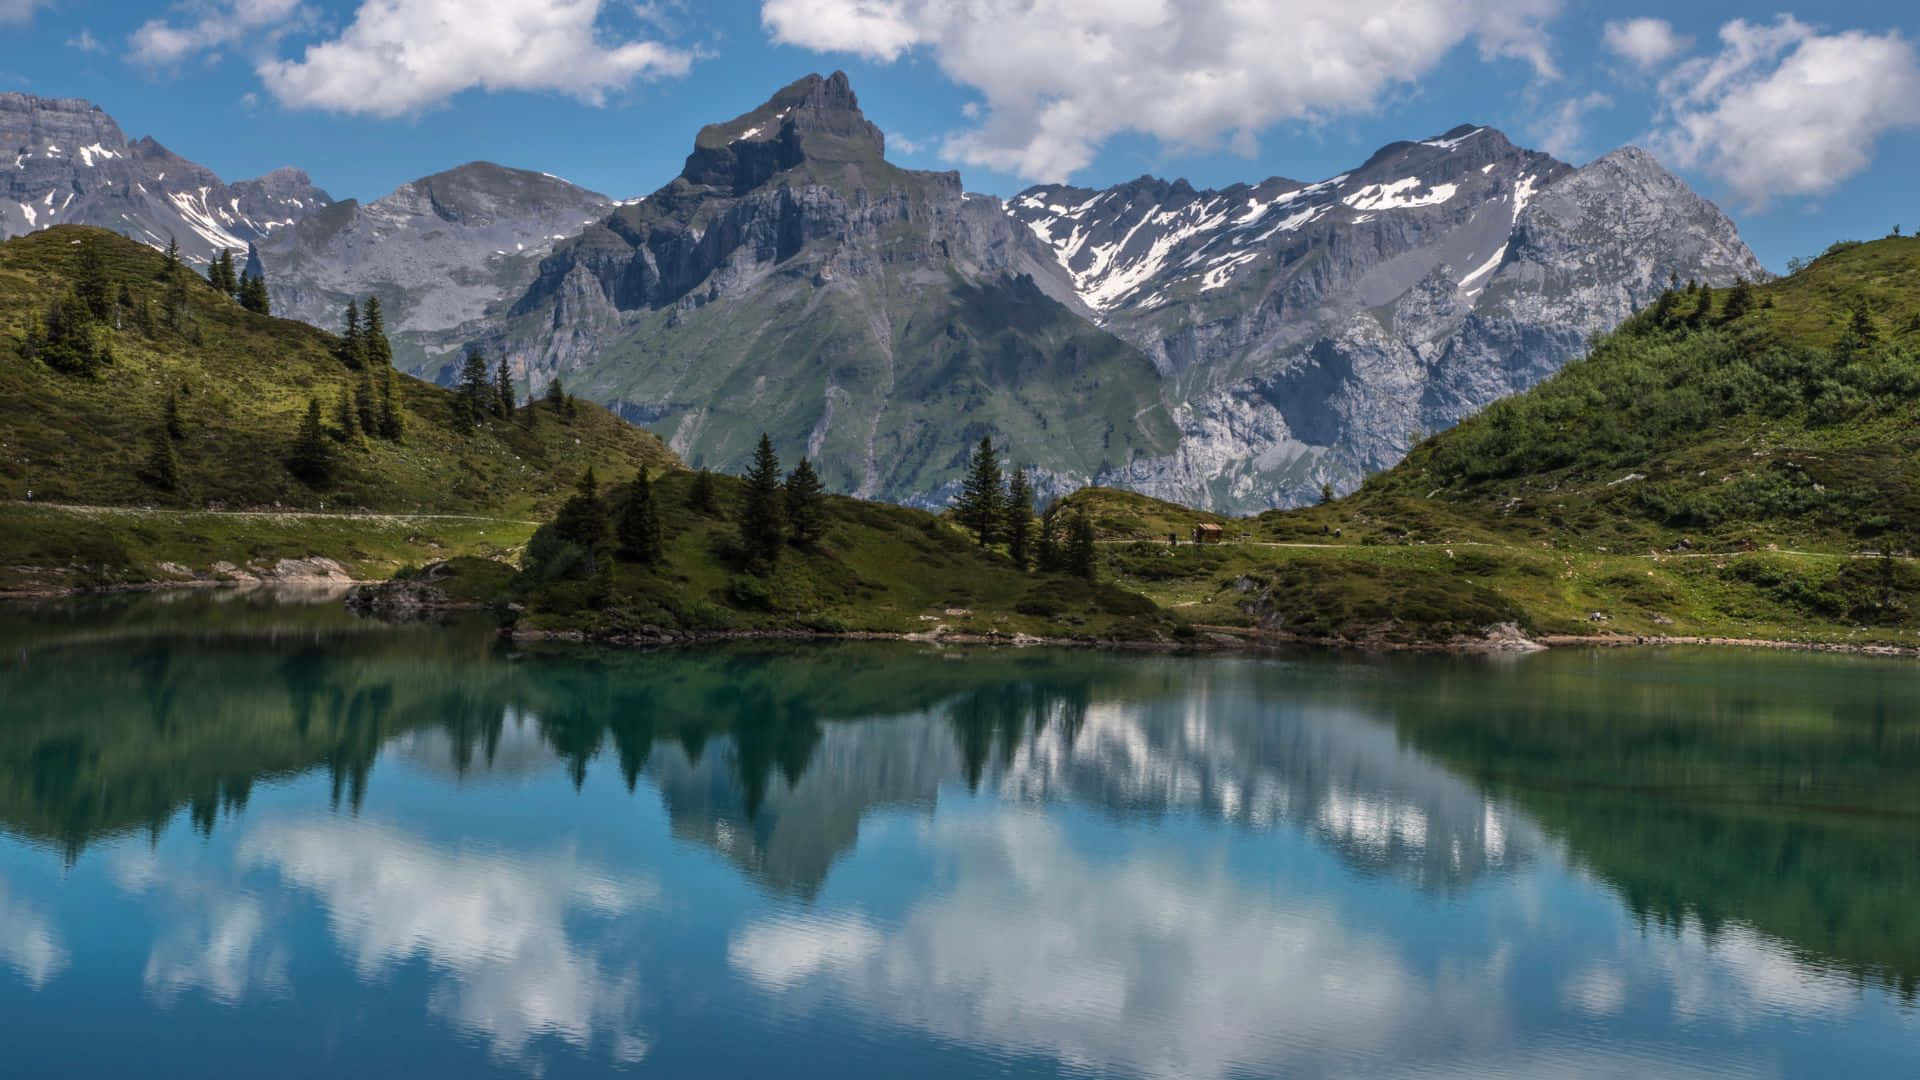 Caption: Stunning Swiss Landscape - Panoramic Views of the Alps